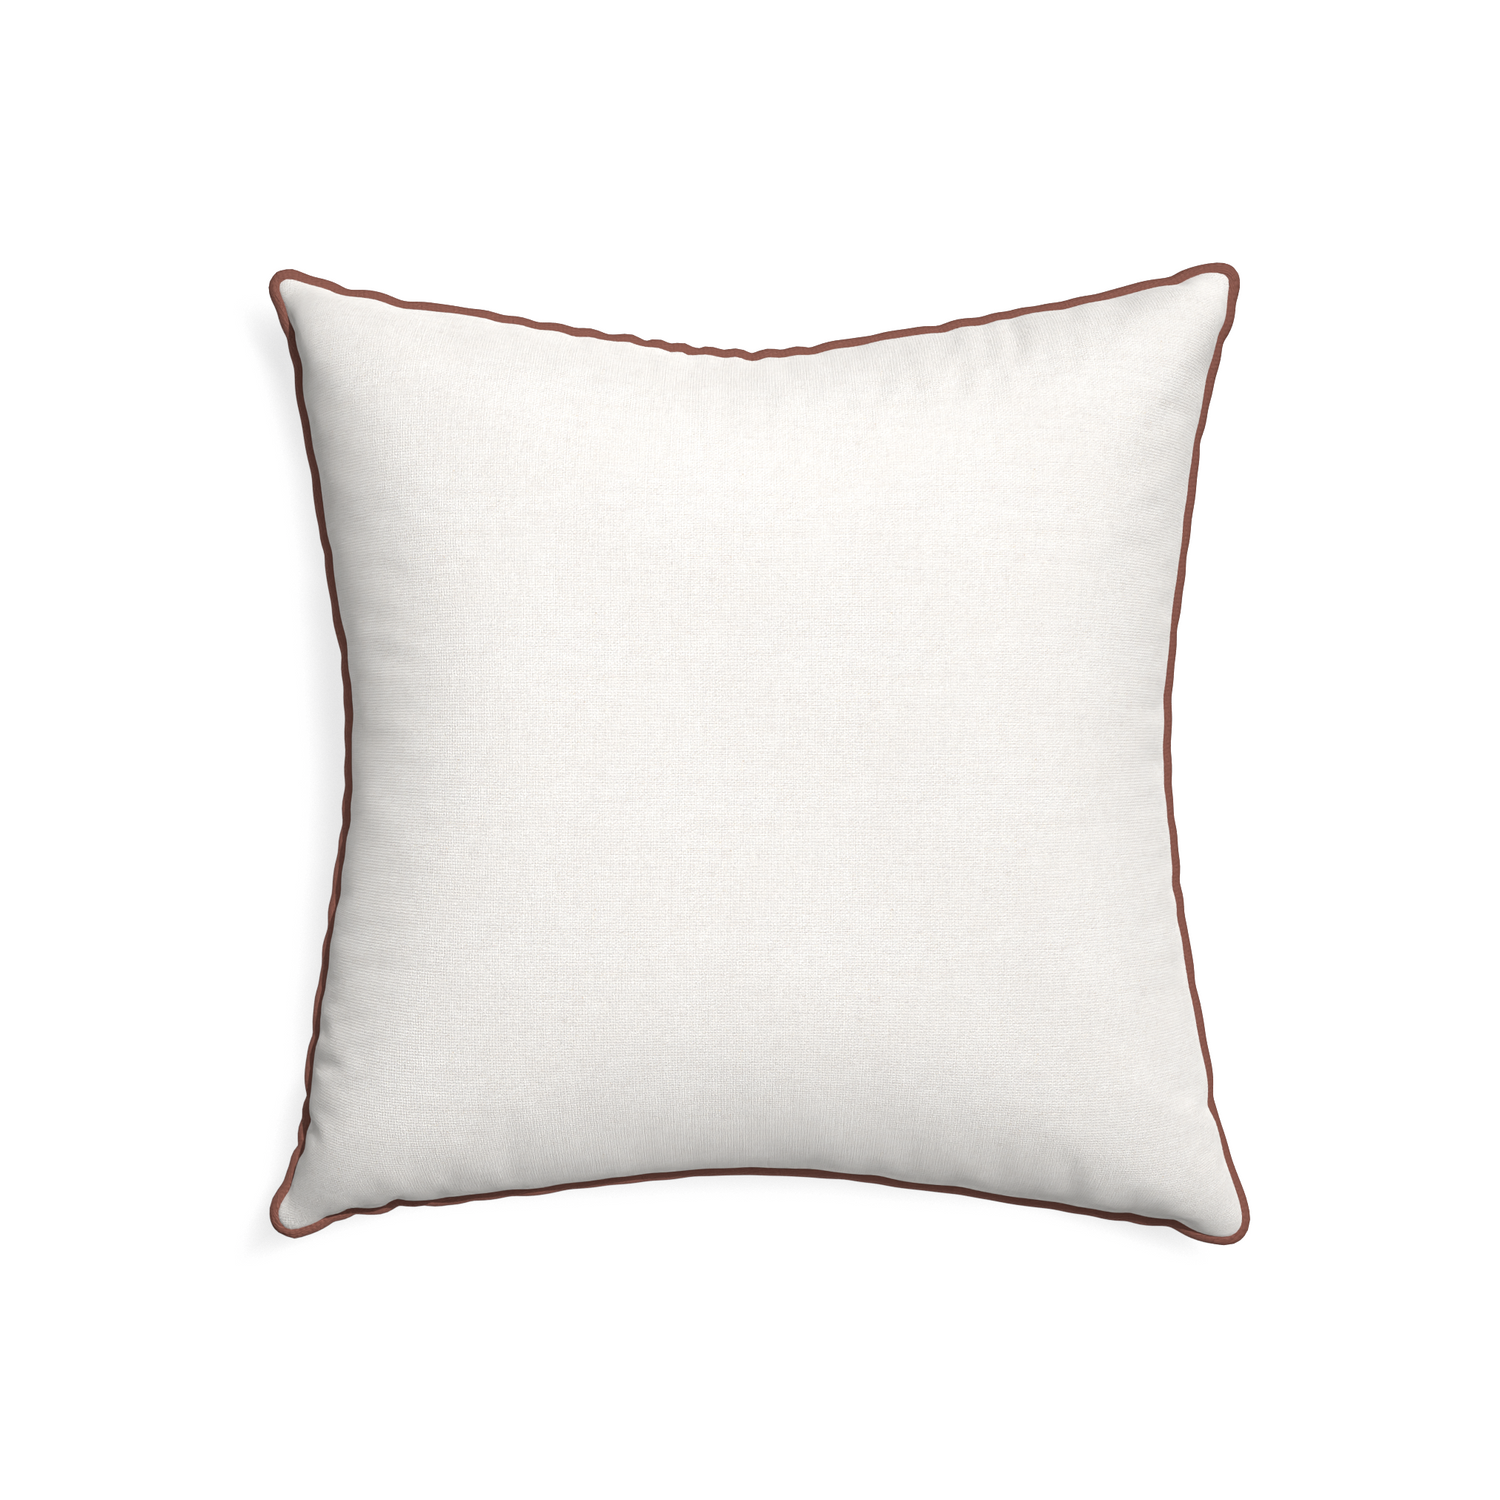 22-square flour custom pillow with w piping on white background